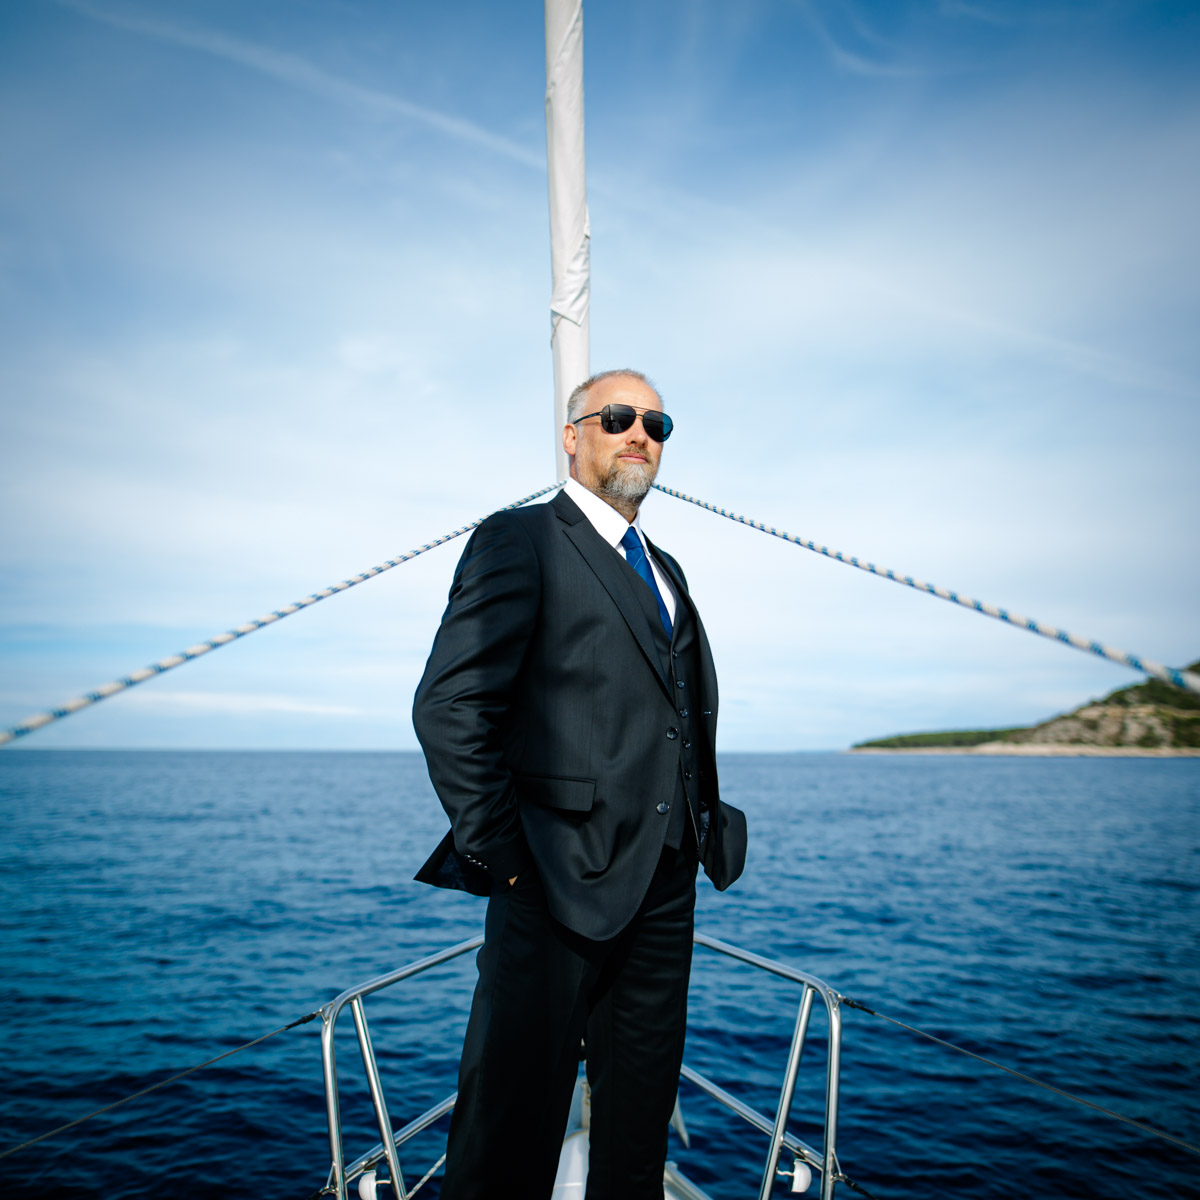 exclusive and expressive lifestyle portrait photoshooting, man in black suit with sunglasses stands at the bow of a yacht, behind him an island and the horizon of the sea :: photo copyright Karin Bergmann